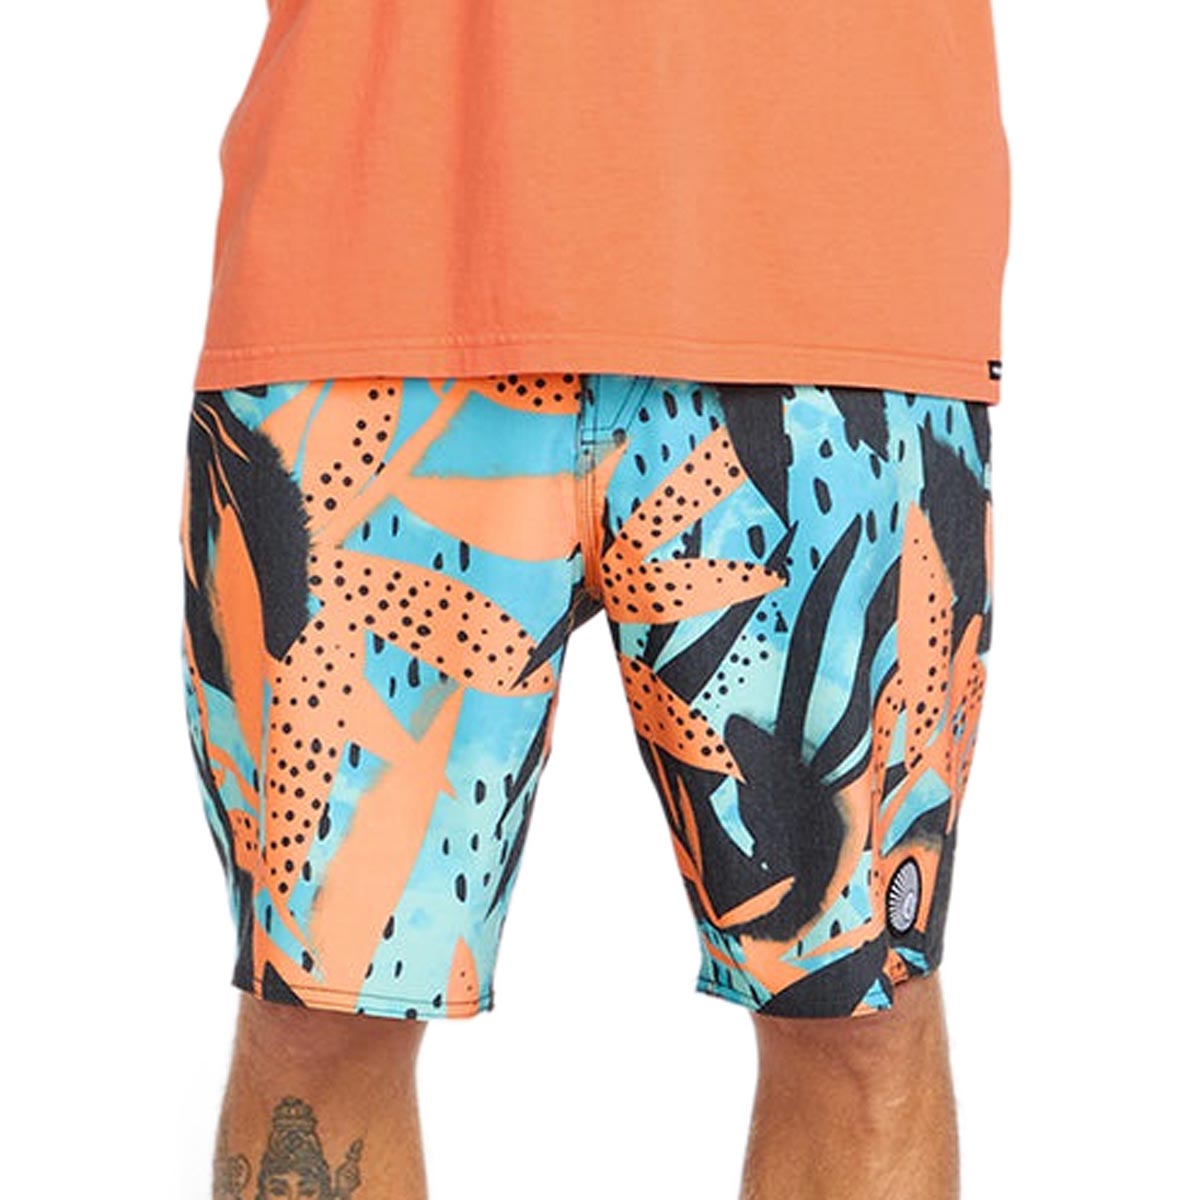 Volcom Waterside Floral Stoney 19 Board Shorts - Tigerlily image 3